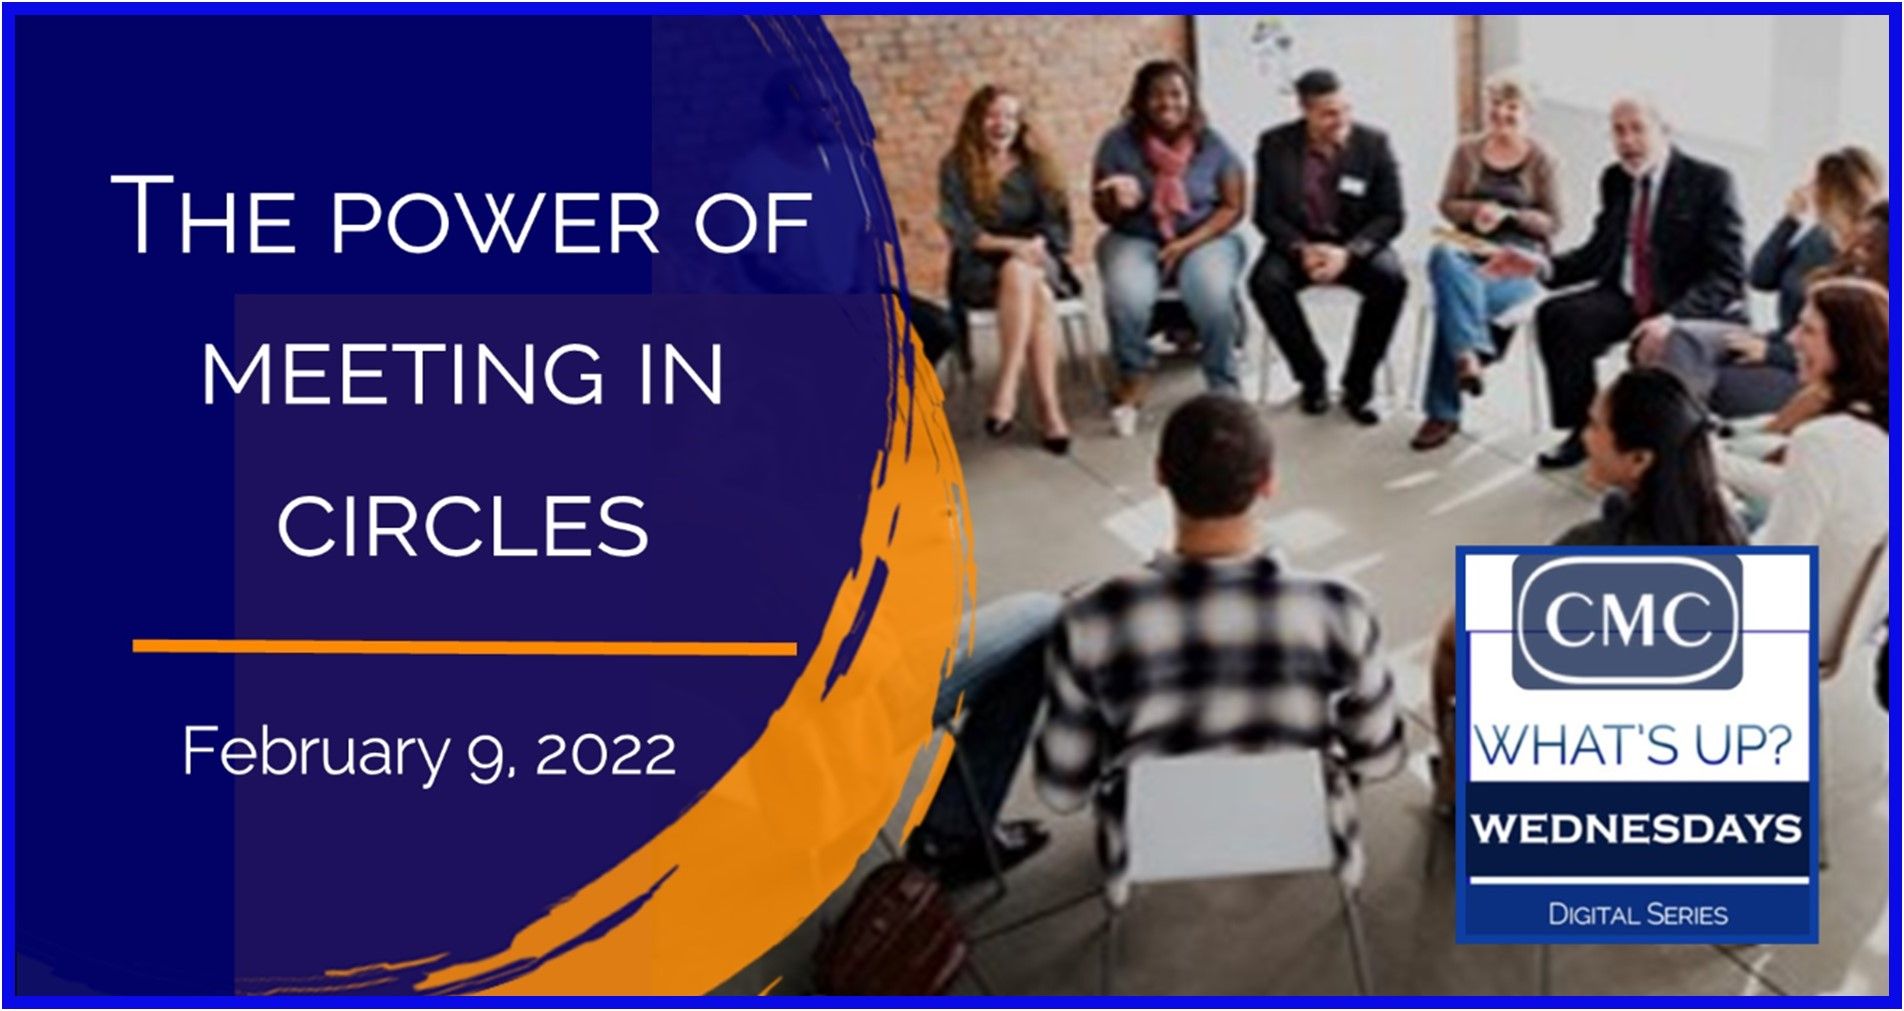 What's up Wednesday - The Power Of Meeting in Circles